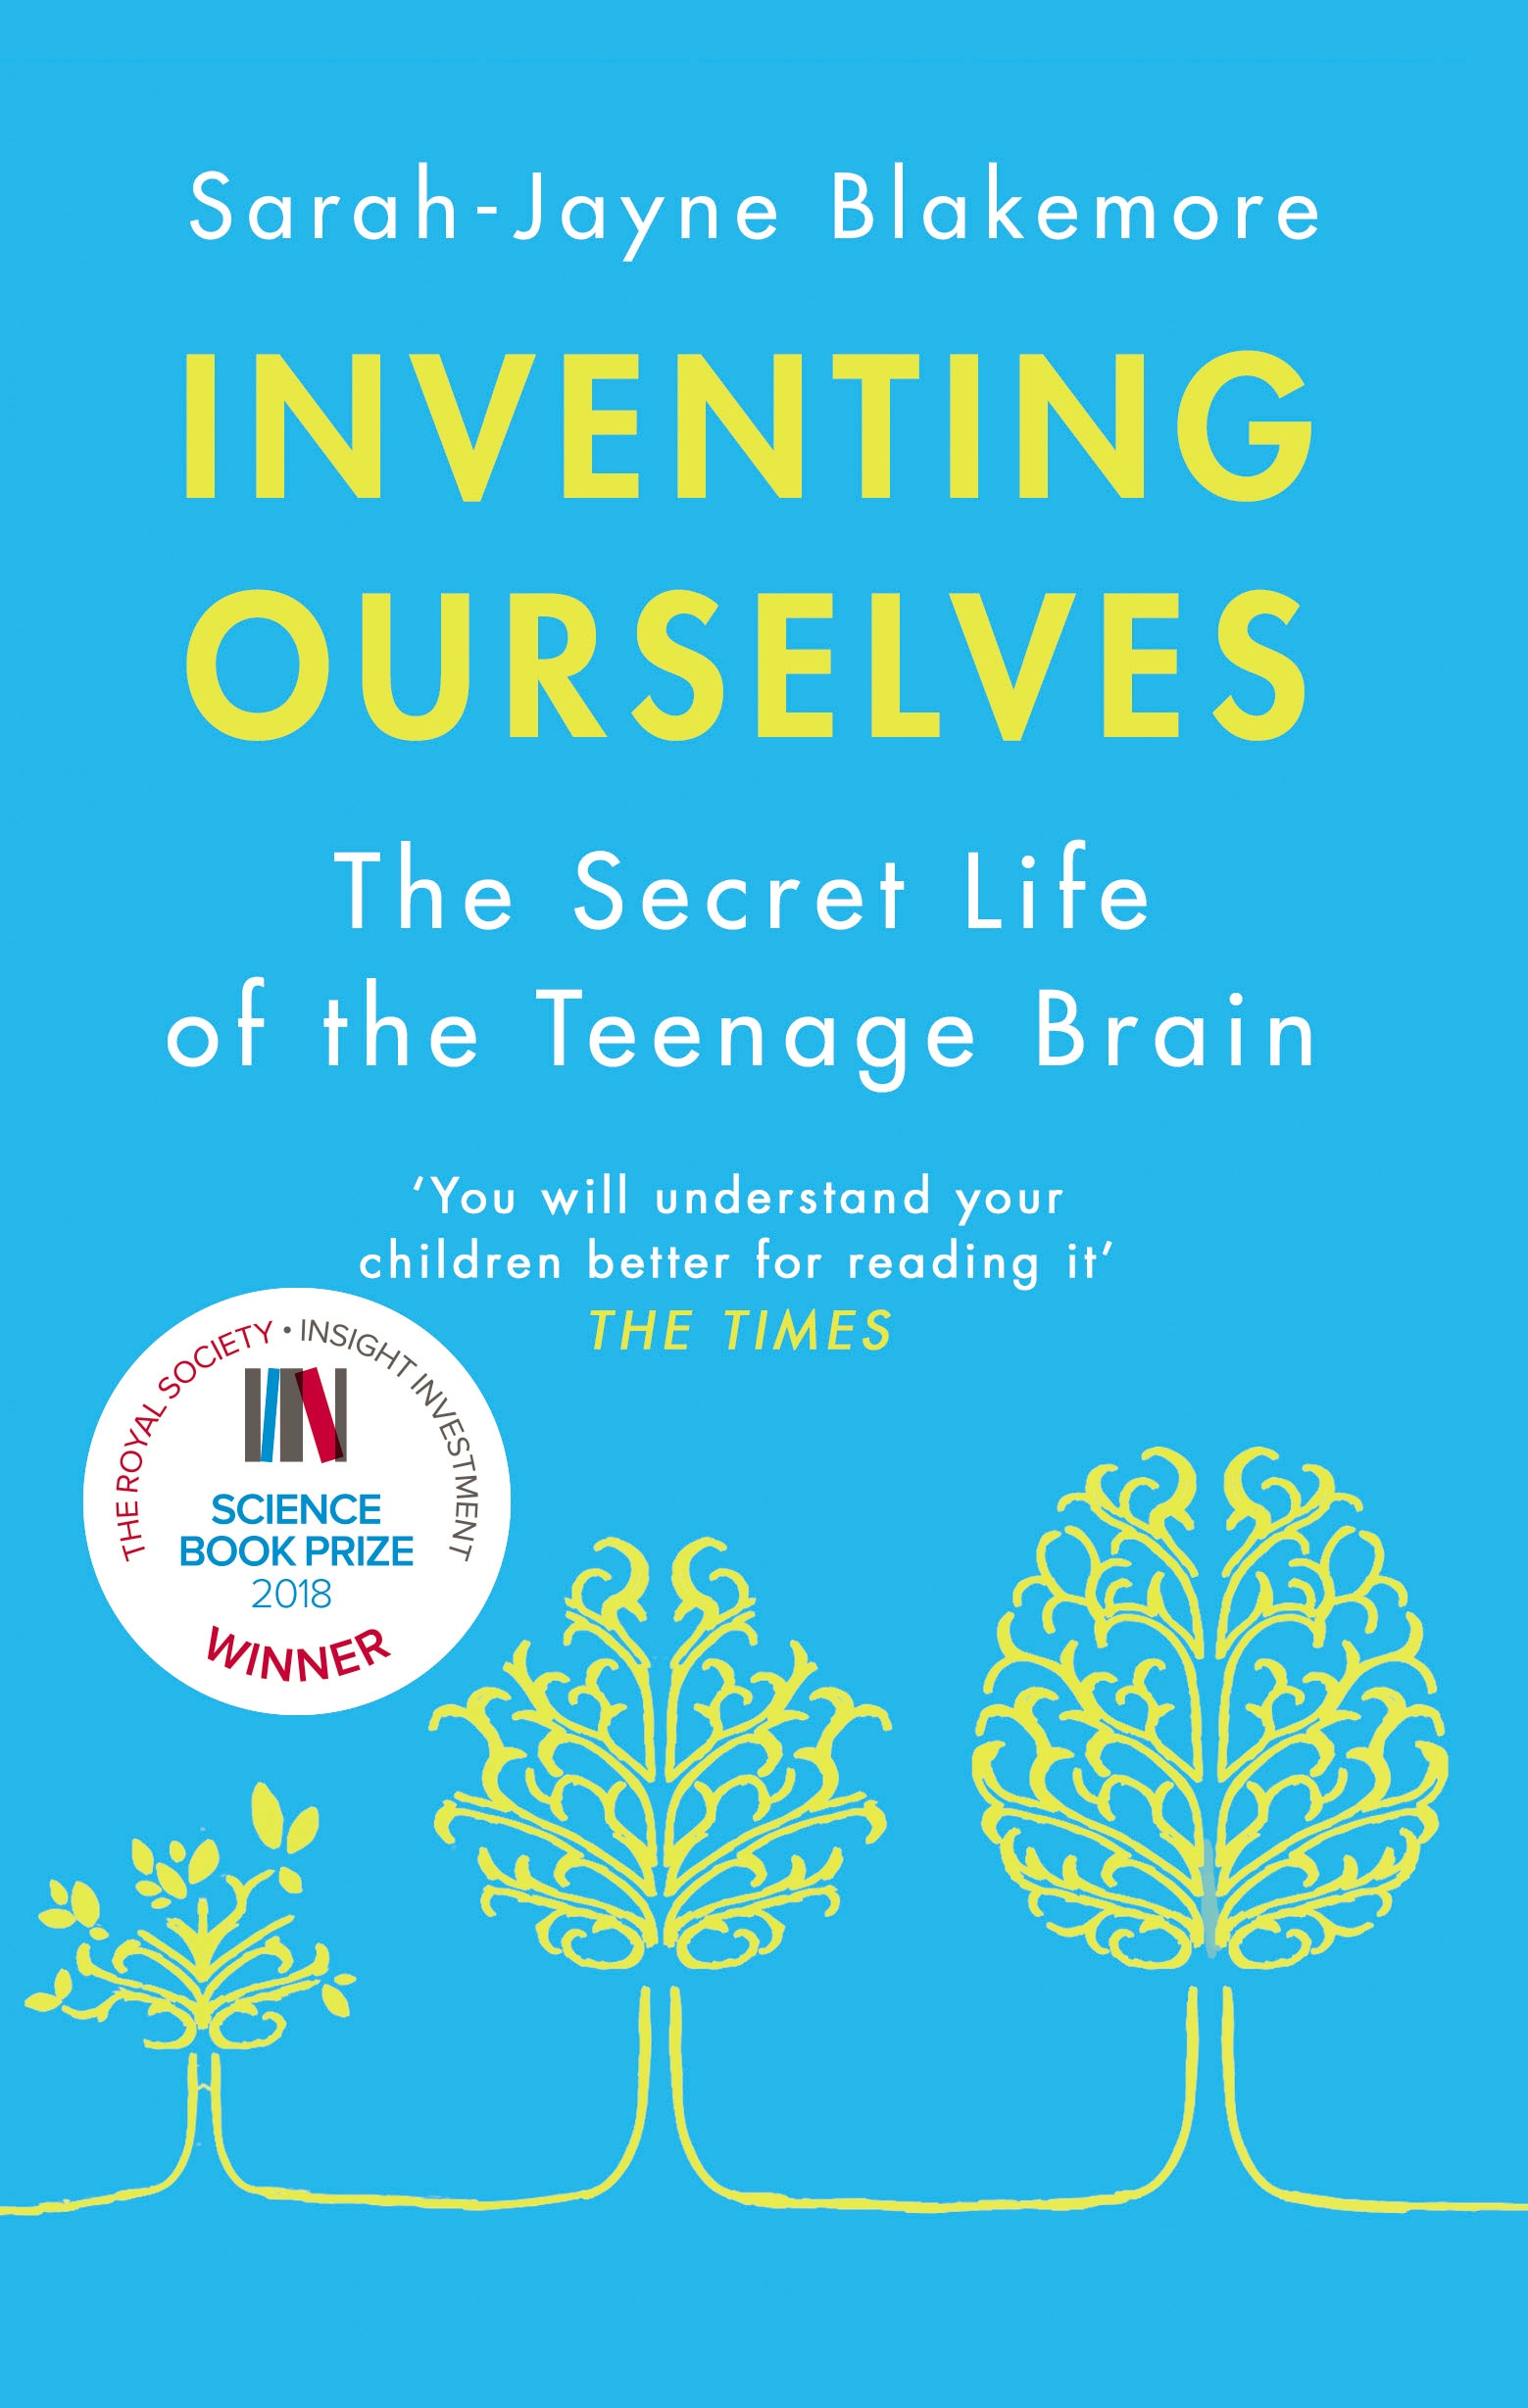 Book “Inventing Ourselves” by Sarah-Jayne Blakemore — March 21, 2019